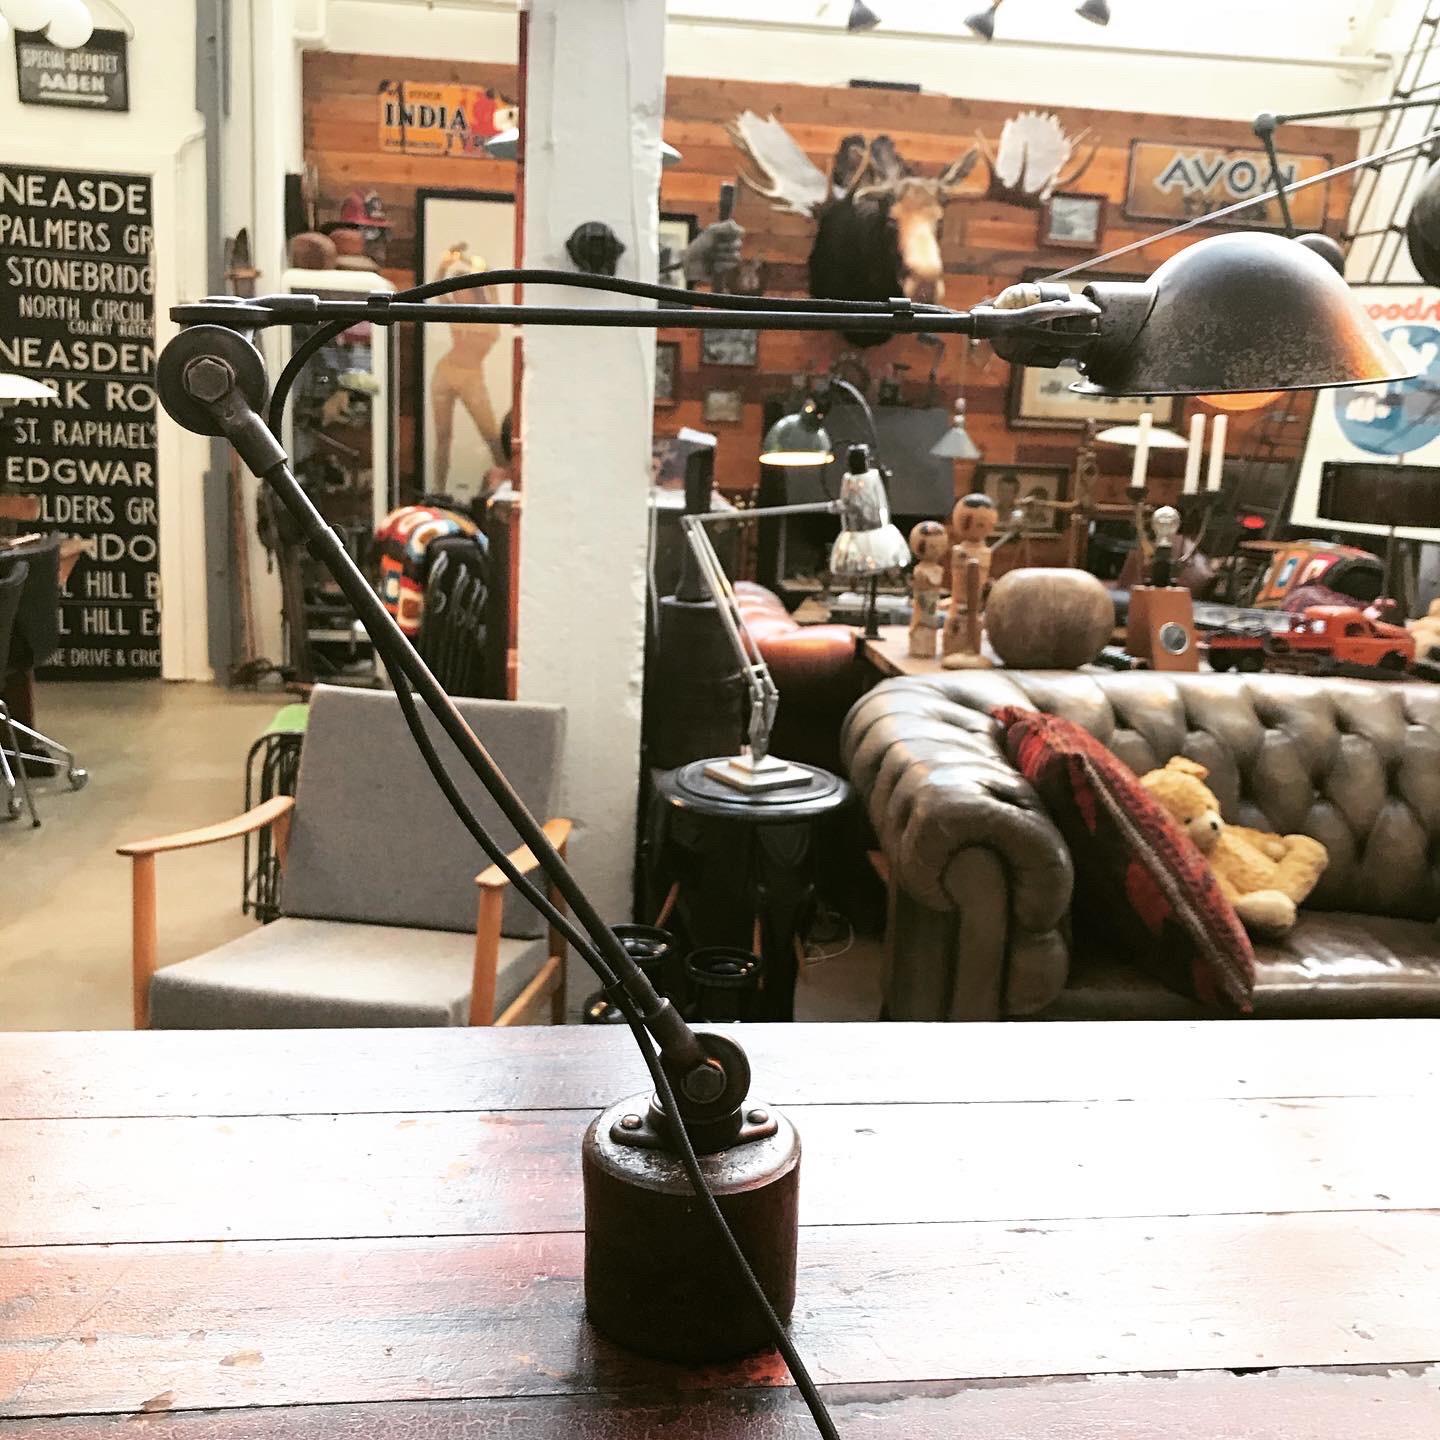 Antique Mc Crosky work lamp in original condition with no repairs.
This lamp has a great patina and age related wear.
A product from the industrial revolution when things were made to last and when that extra effort was put into design and